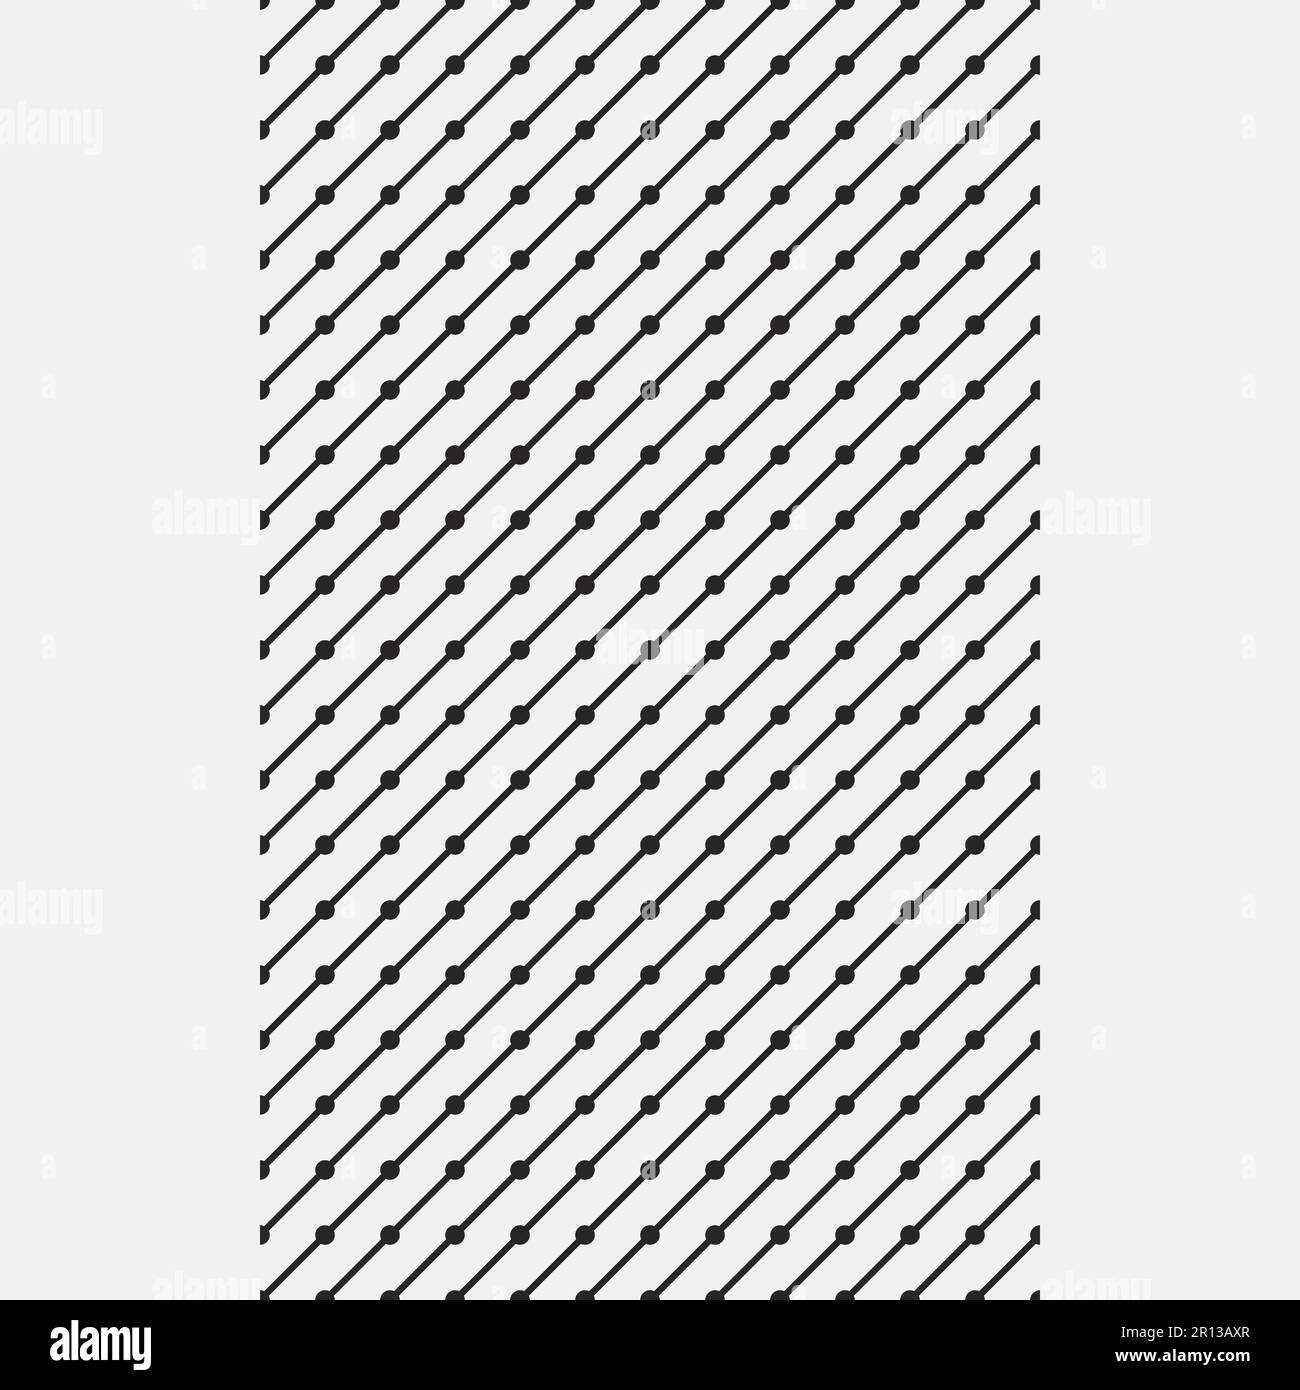 Diagonal stripes pattern. Vector seamless striped texture. Abstract  monochrome geometric background with thin parallel slanted lines. Simple  stylish repeat design for tileable print, decoration, cover Stock Vector